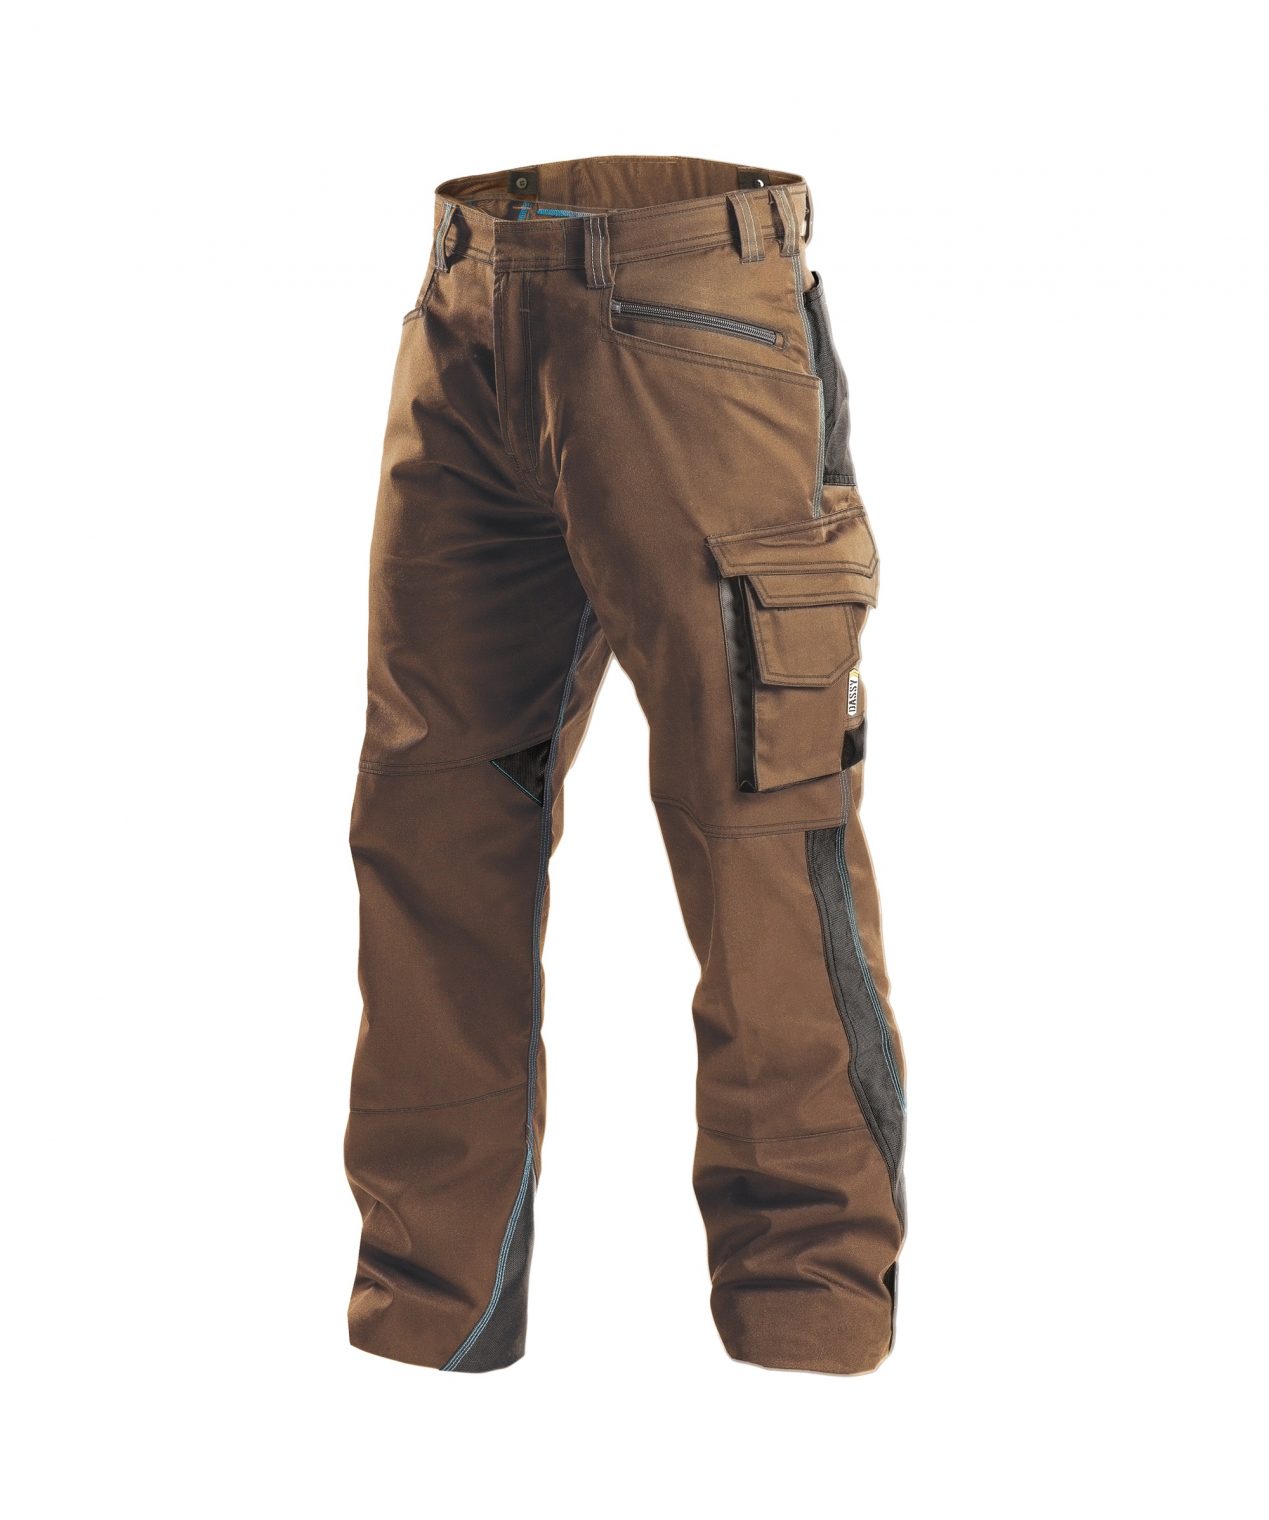 spectrum work trousers clay brown anthracite grey detail